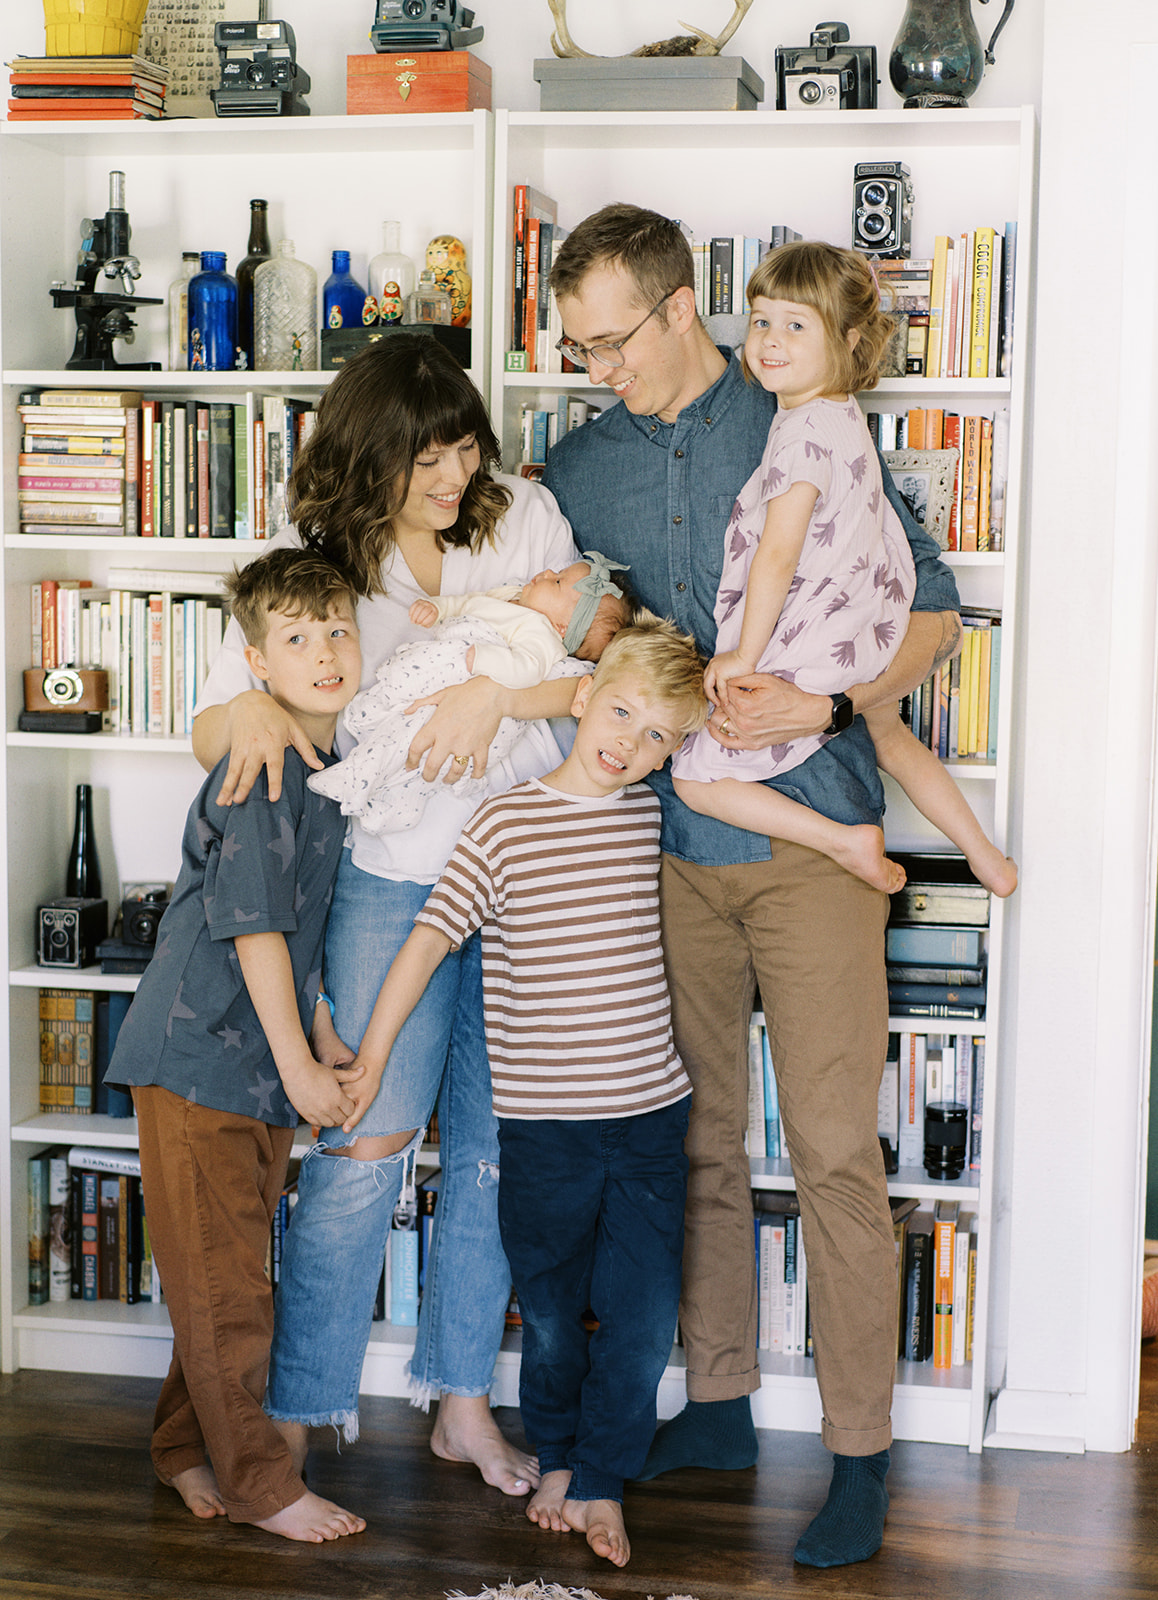 A family of 6 stands in front of a bookshelf with the new baby during their at-home lifestyle session